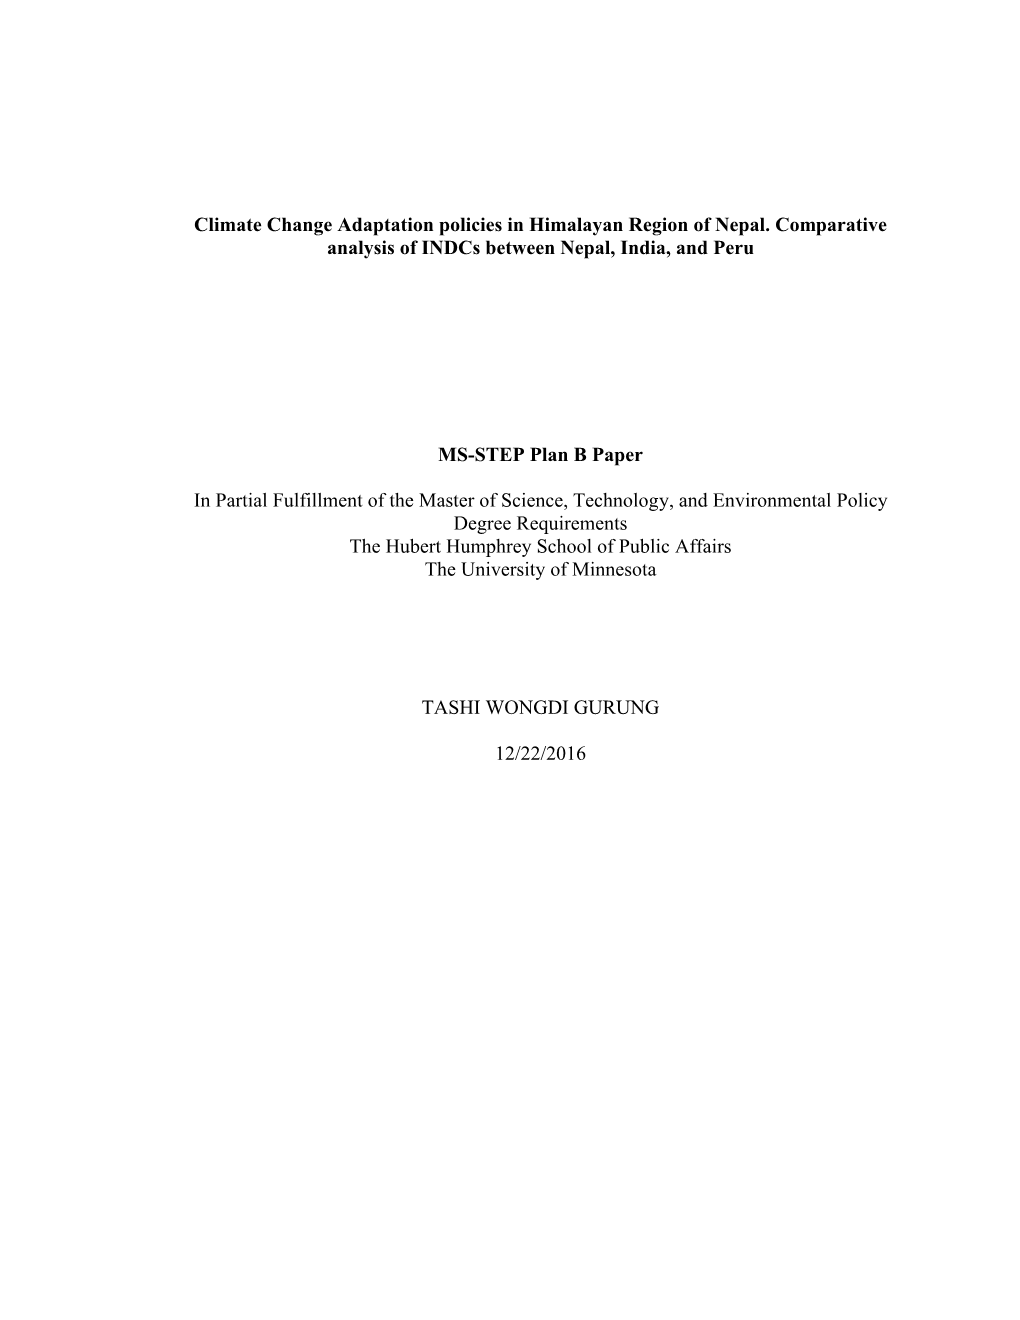 Climate Change Adaptation Policies in Himalayan Region of Nepal